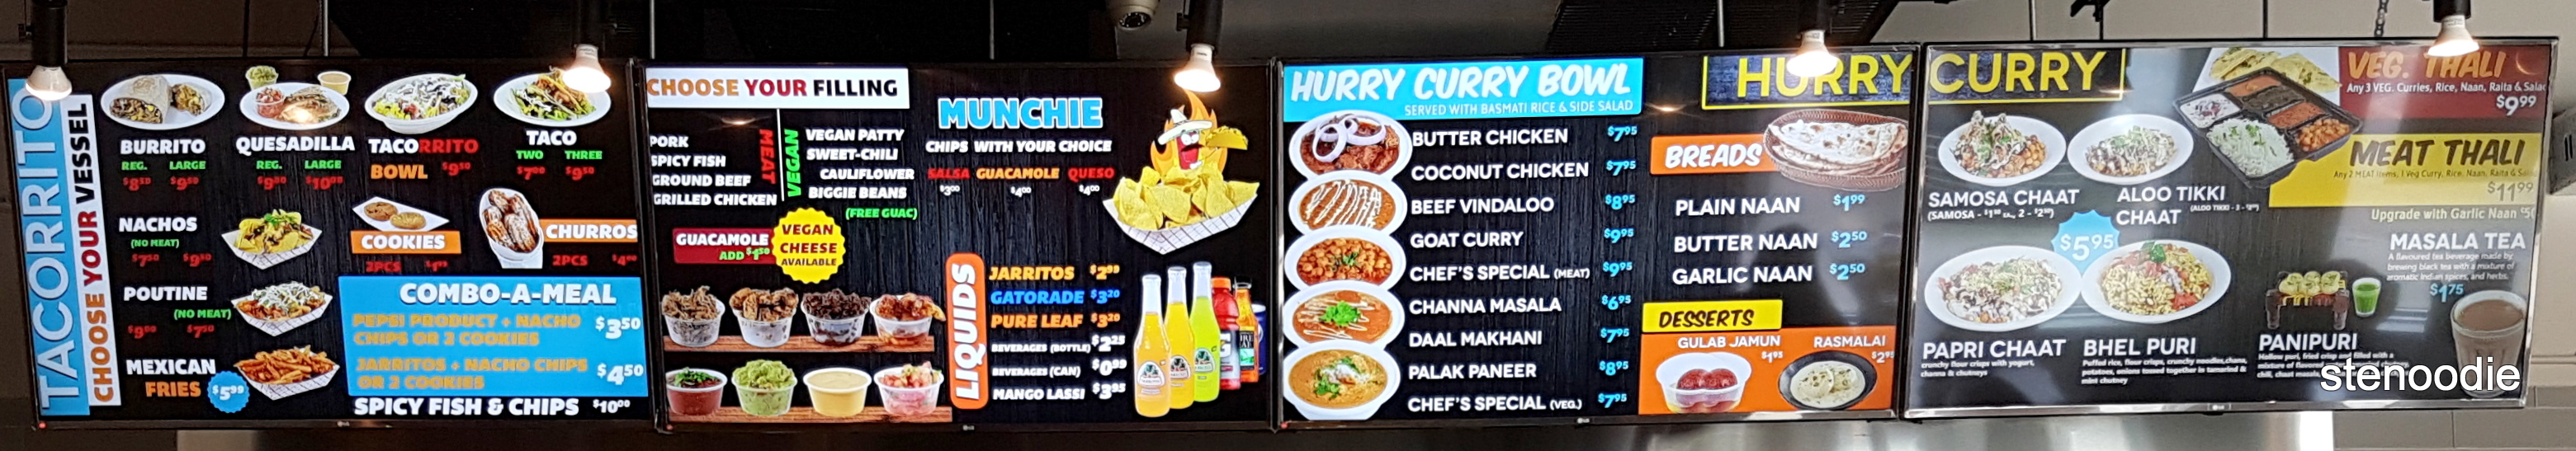 Hurry Curry and Tacorrito menu and prices